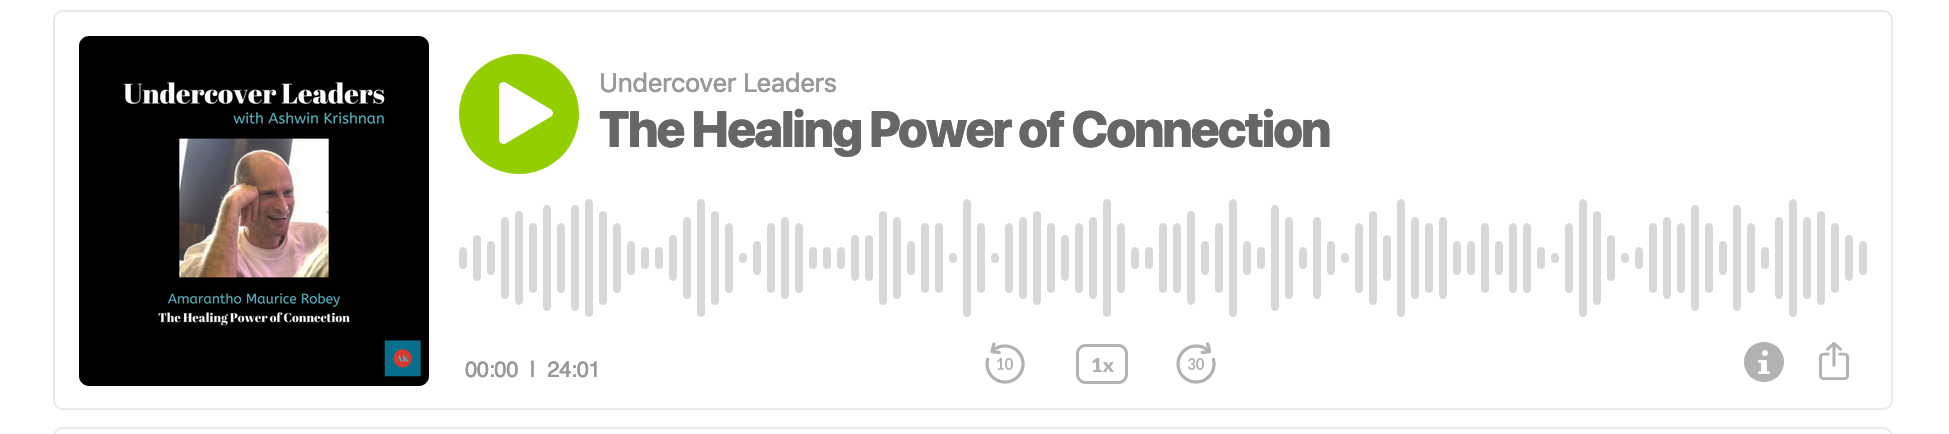 Undercover leaders – The healing power of connection